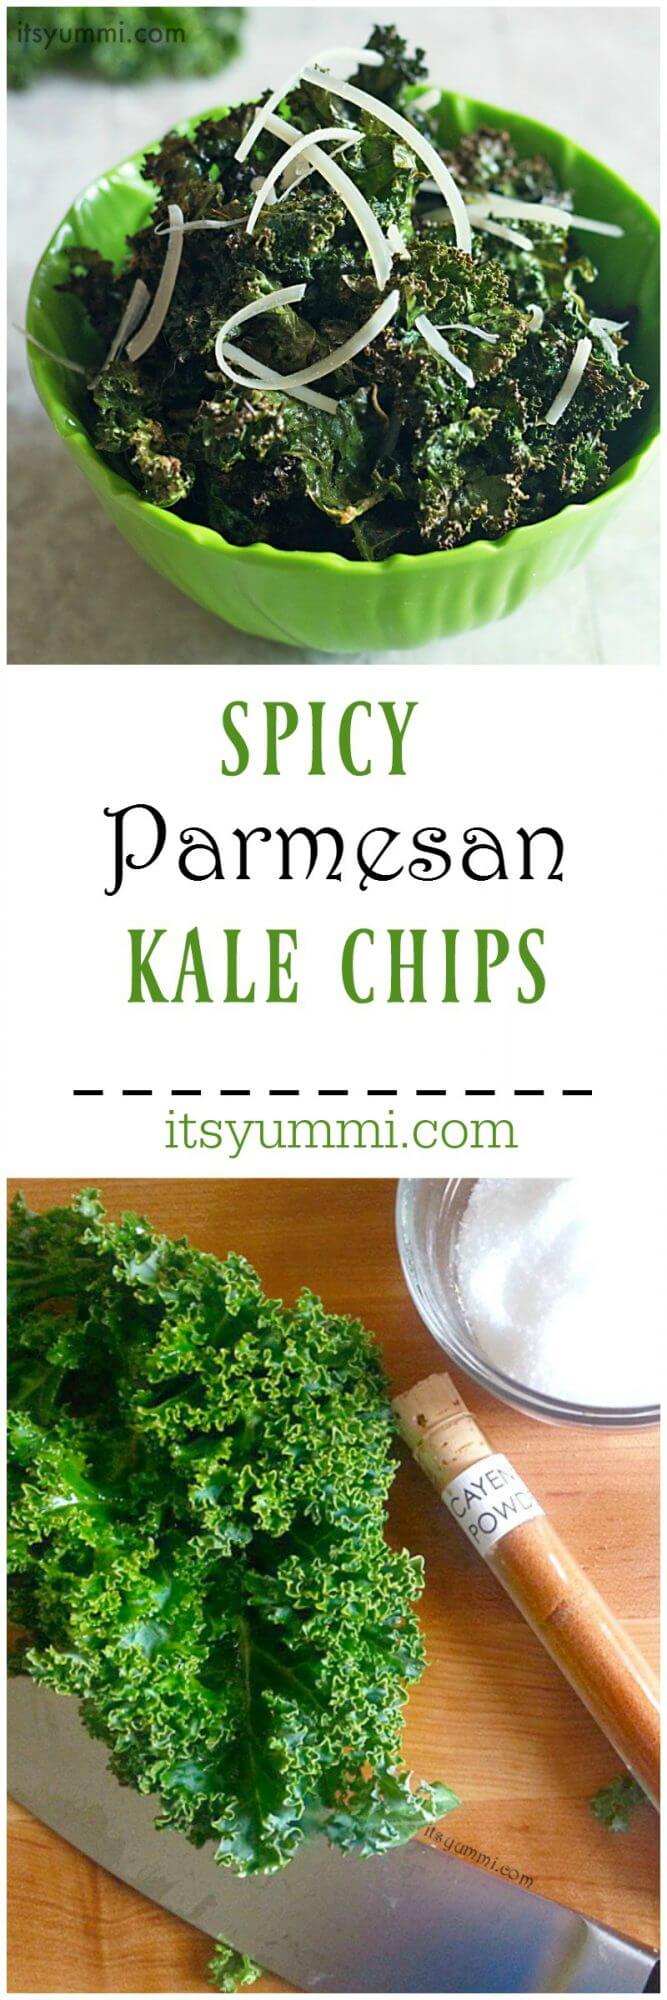 Spicy Parmesan Kale Chips - A healthy snack food that's perfect for game day snacking or after school snacks. Recipe on itsyummi.com